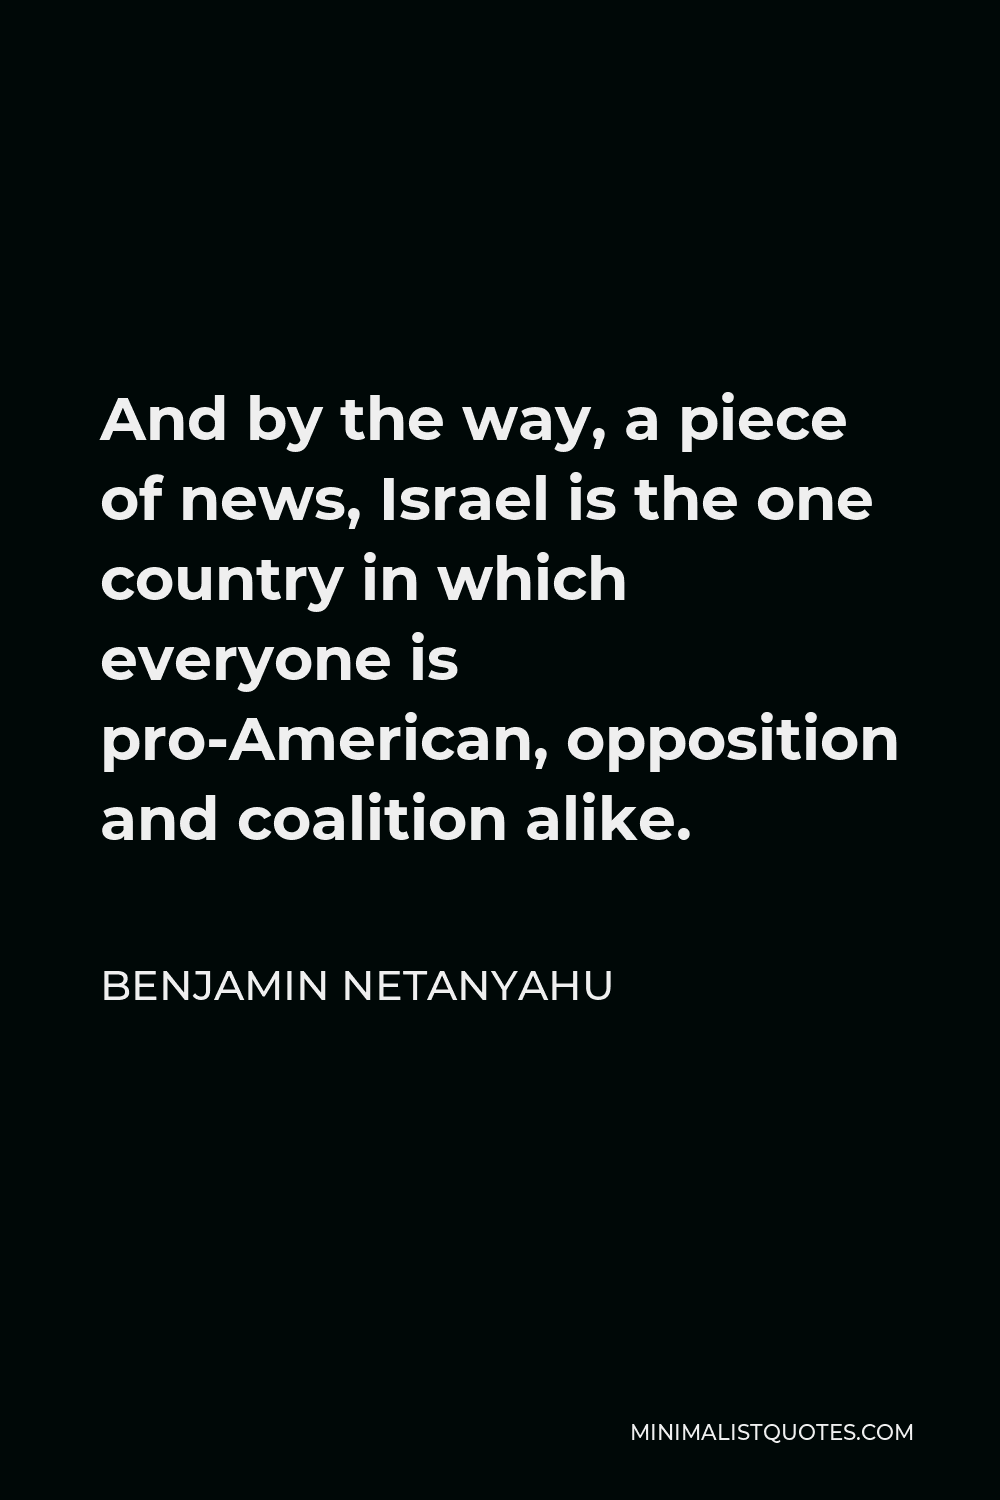 Benjamin Netanyahu Quote - And by the way, a piece of news, Israel is the one country in which everyone is pro-American, opposition and coalition alike.